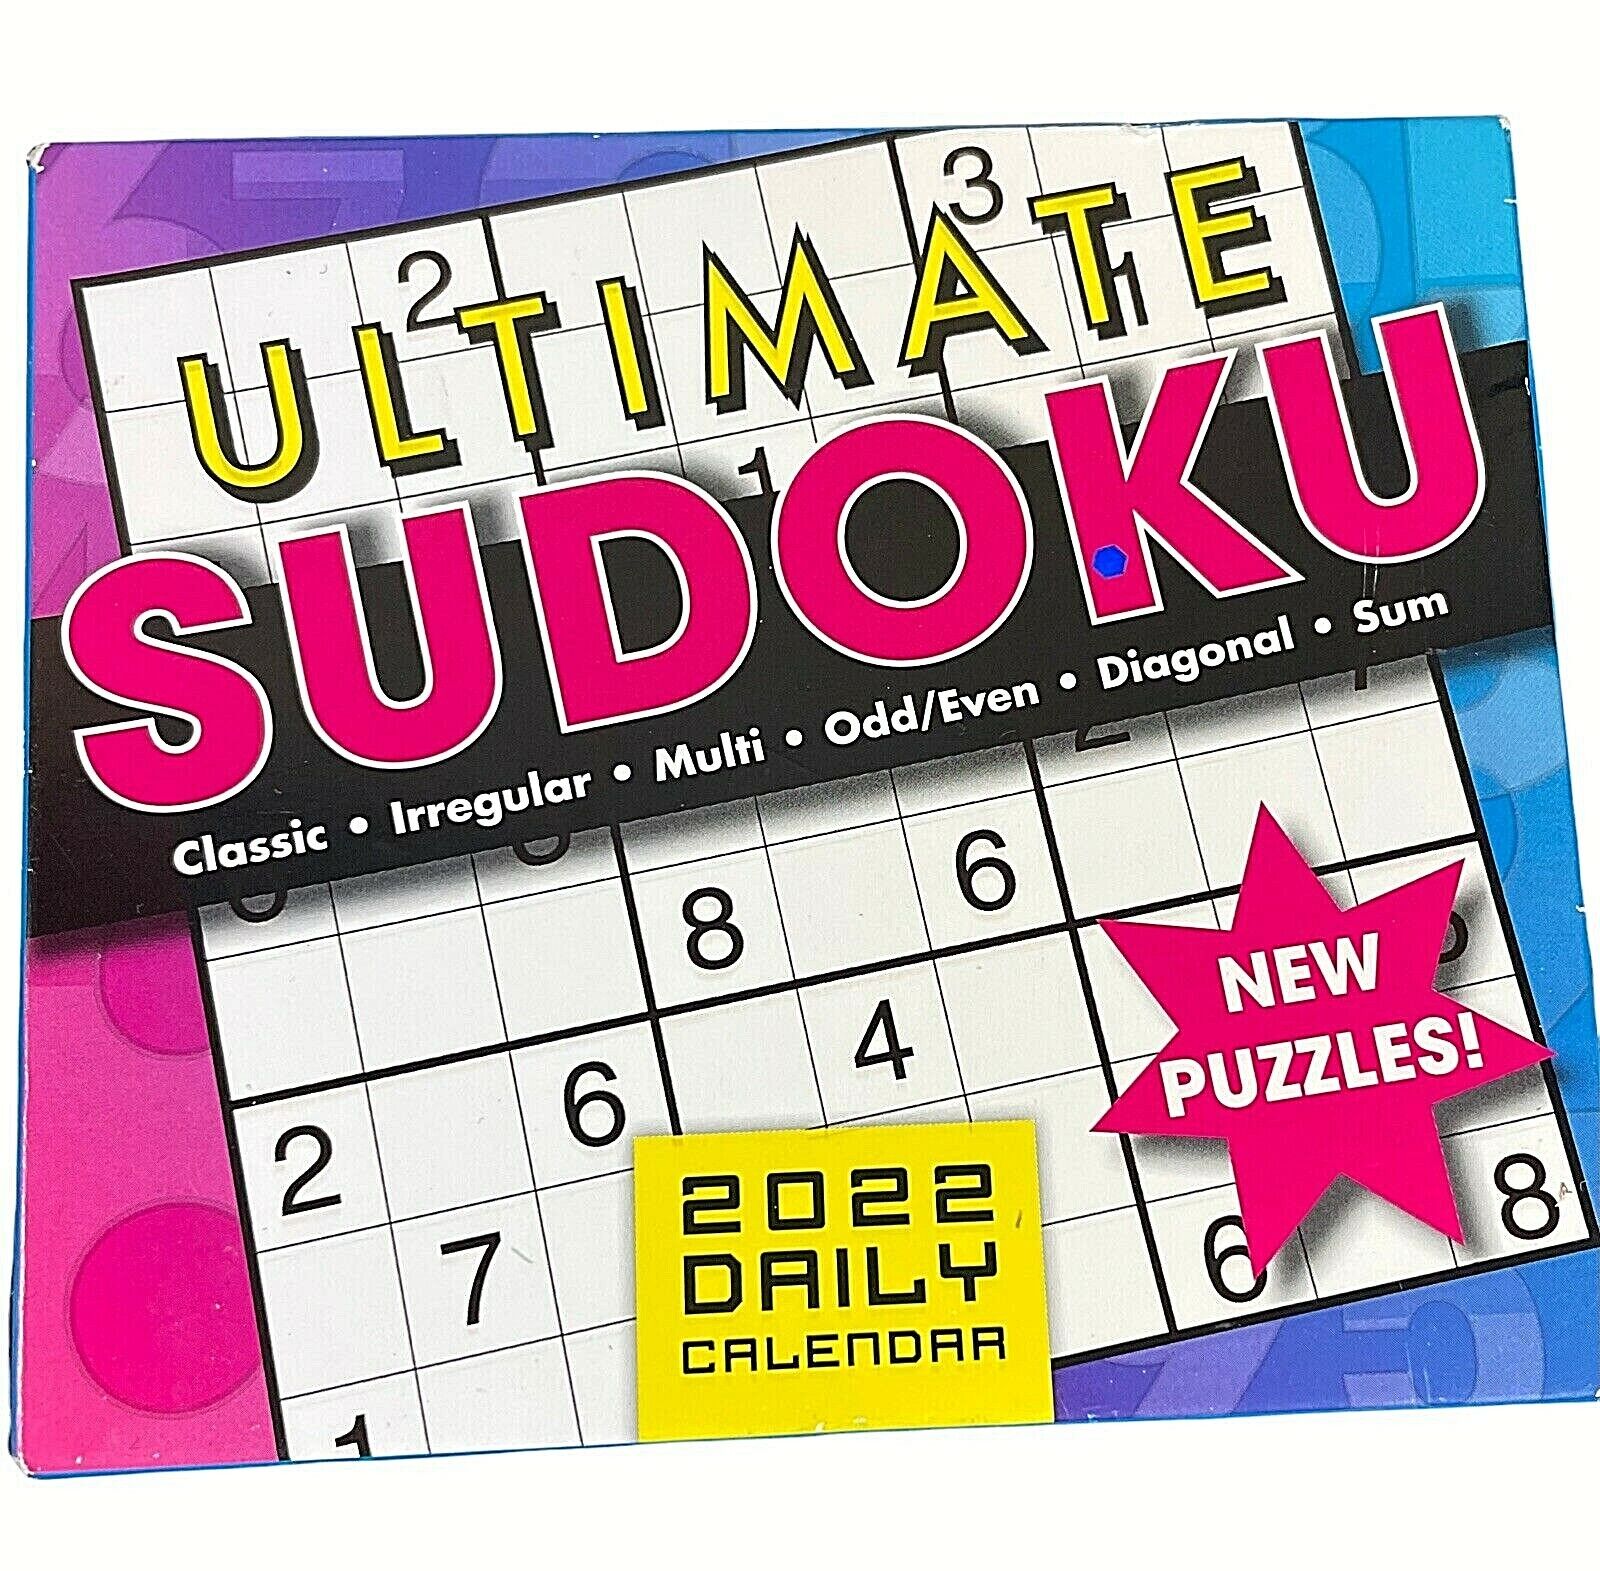 New Sealed Ultimate Sudoku Daily 2022 Puzzle Calendar Gift w/ Solutions on Back